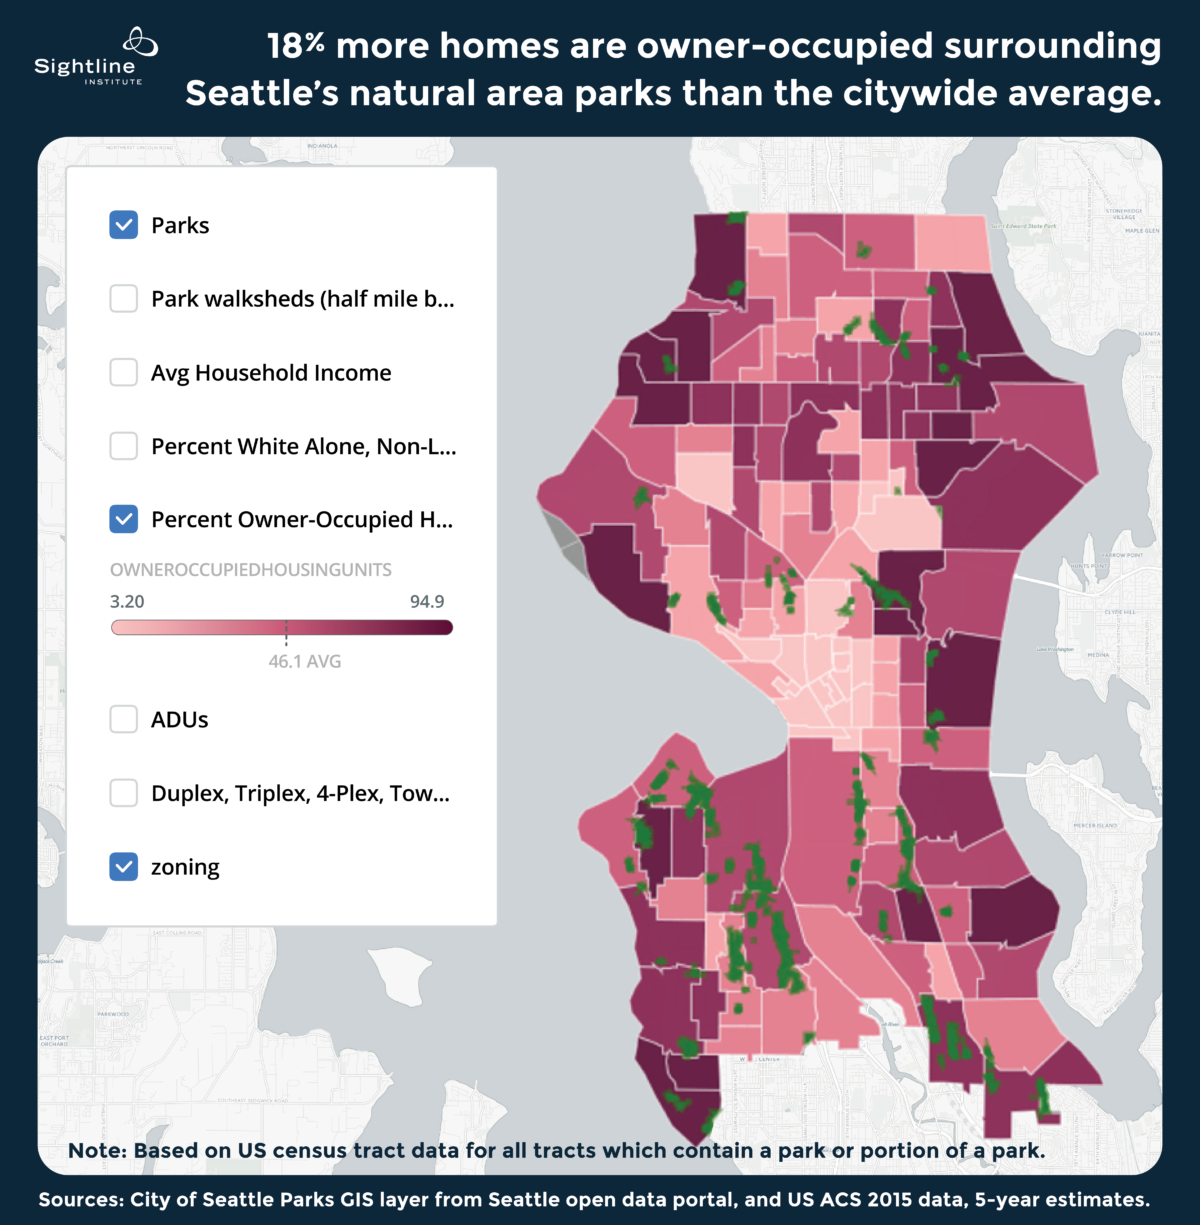 The map shows in green Seattle’s 49 greenbelt and natural area parks larger than one acre. The city’s census tracts are color-coded based on the percentage of housing units that are owner-occupied, with darkest pink tracts having 85 percent or more owner-occupied units and lightest pink tracts having 15 percent or fewer owner-occupied units. The image shows that very few natural area parks touch light pink tracts - those with higher rates of renter occupancy. Original Sightline Institute graphic, available under our free use policy.